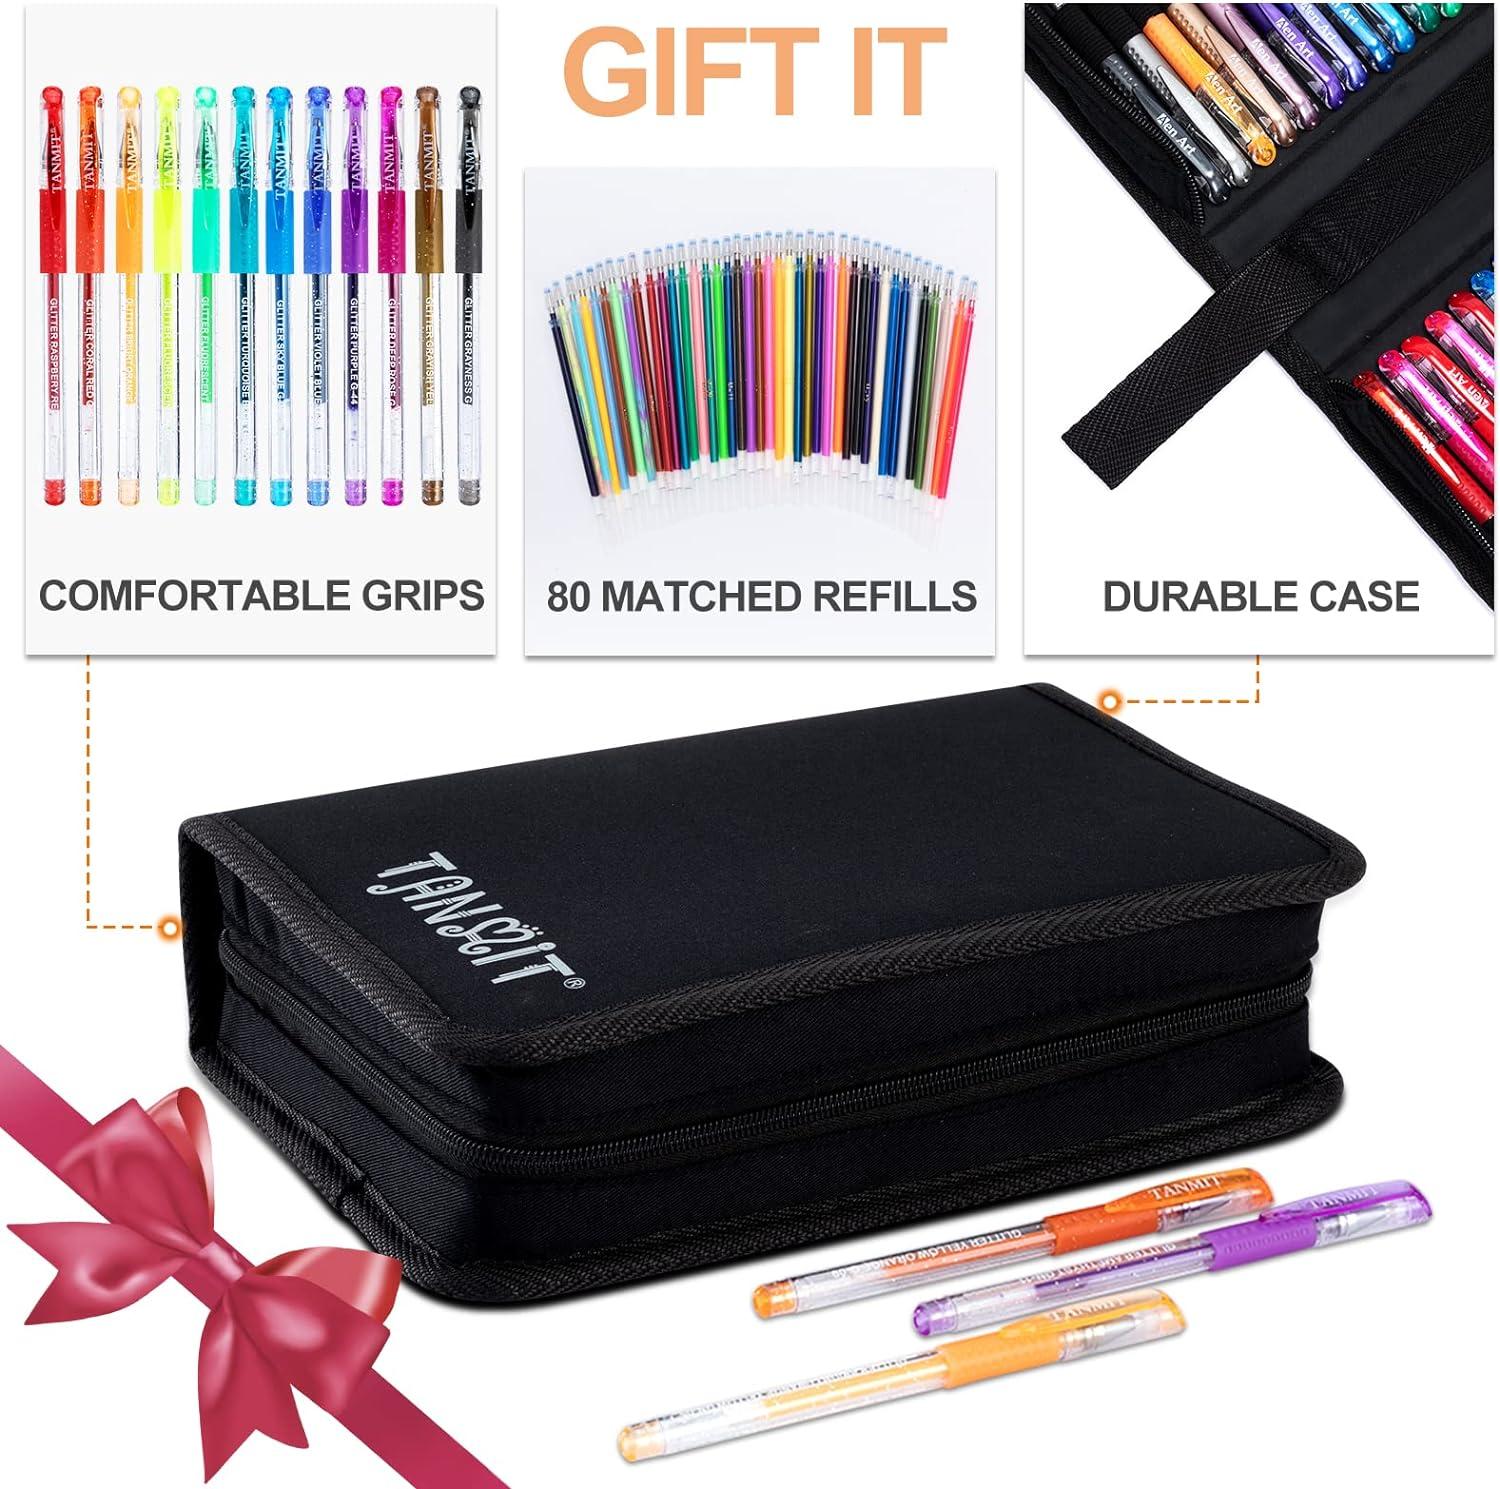 Glitter Gel Pens,Glitter Pen with Case for Adults Coloring Books